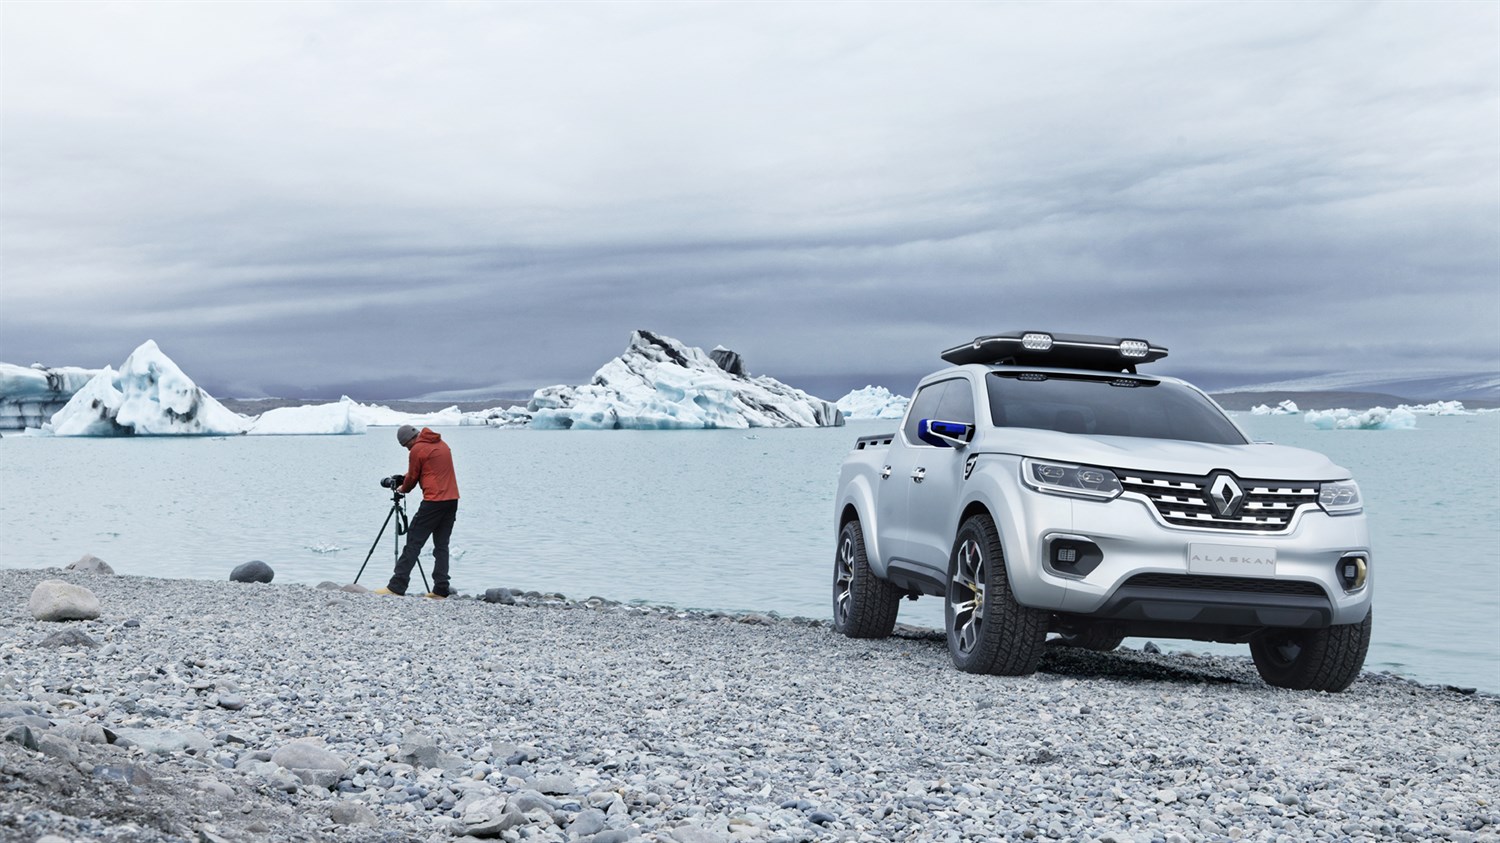 A man standing and clicking picture next to his Renault ALASKAN concept car